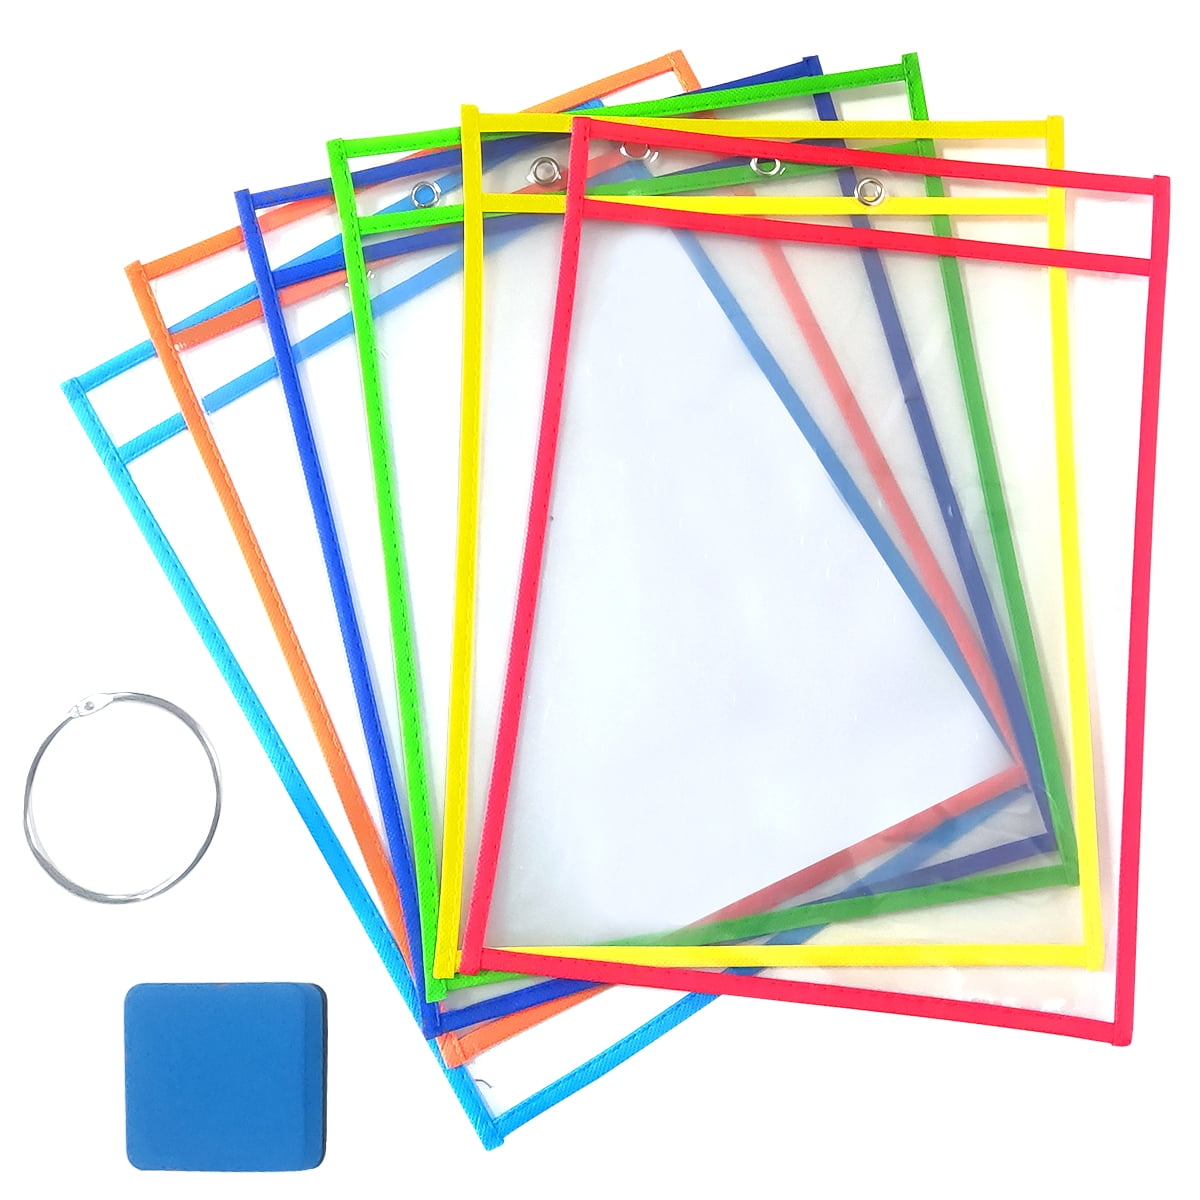 INFUN Dry Erase Pockets - 20 Pack,Oversized Reusable Dry Erase Sleeves,  Multicolored Dry Erase Pocket Sleeves with 20 Markers 4 Eraser 2 Metal  Rings